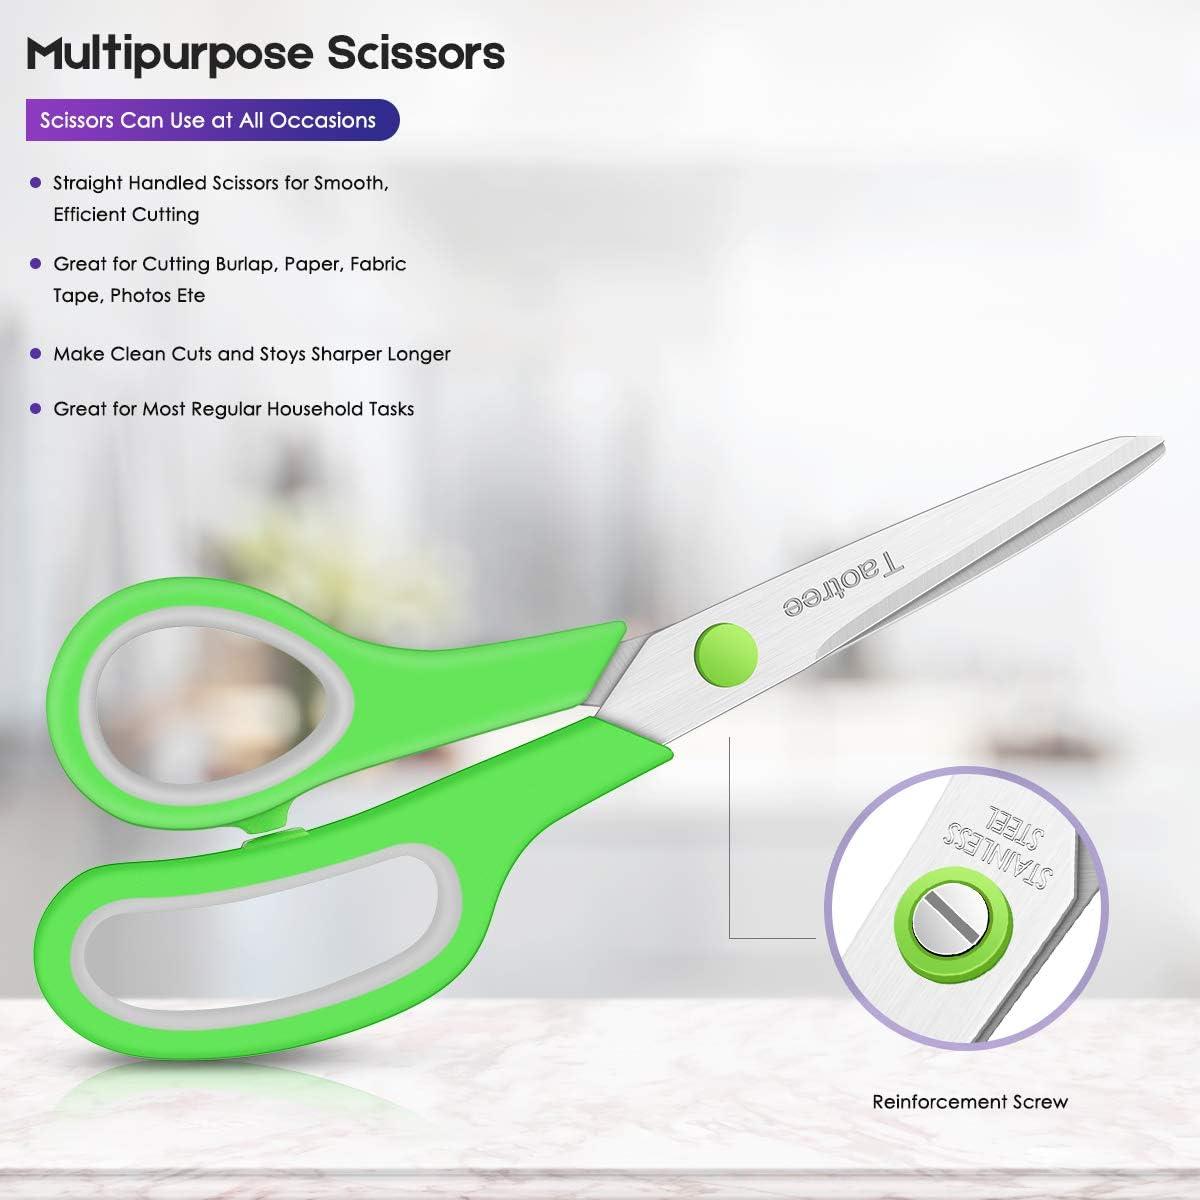 Stainless Steel Sharp Scissors, Suitable For General Use In